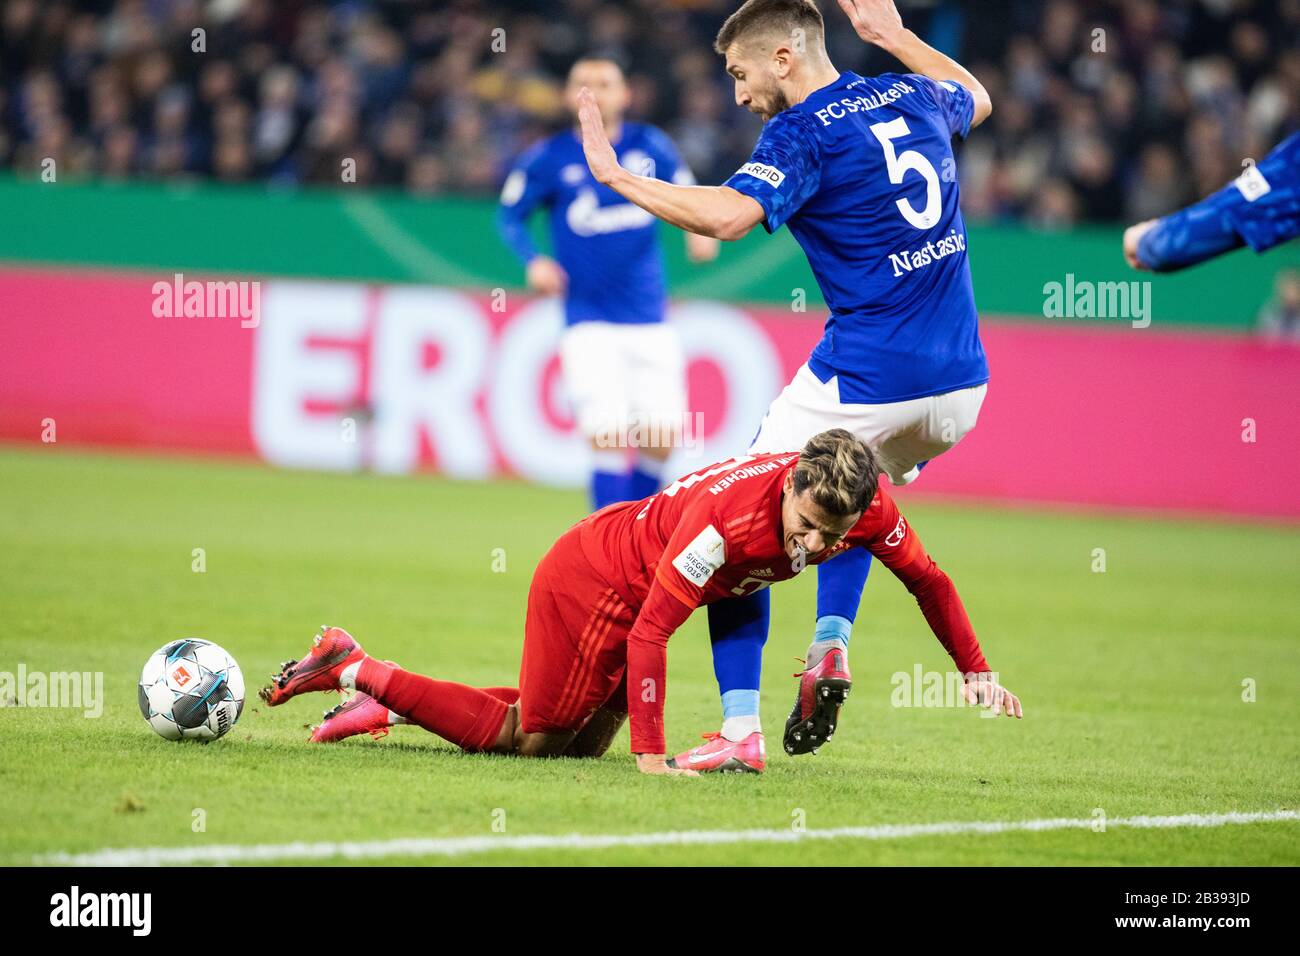 Gelsenkirchen, Germany, Veltins-Arena, 3.03.2020: Philippe Coutinho of Muenchen (L) challenges Matija Nastasic of Schalke 04 during the cup match DFB Stock Photo